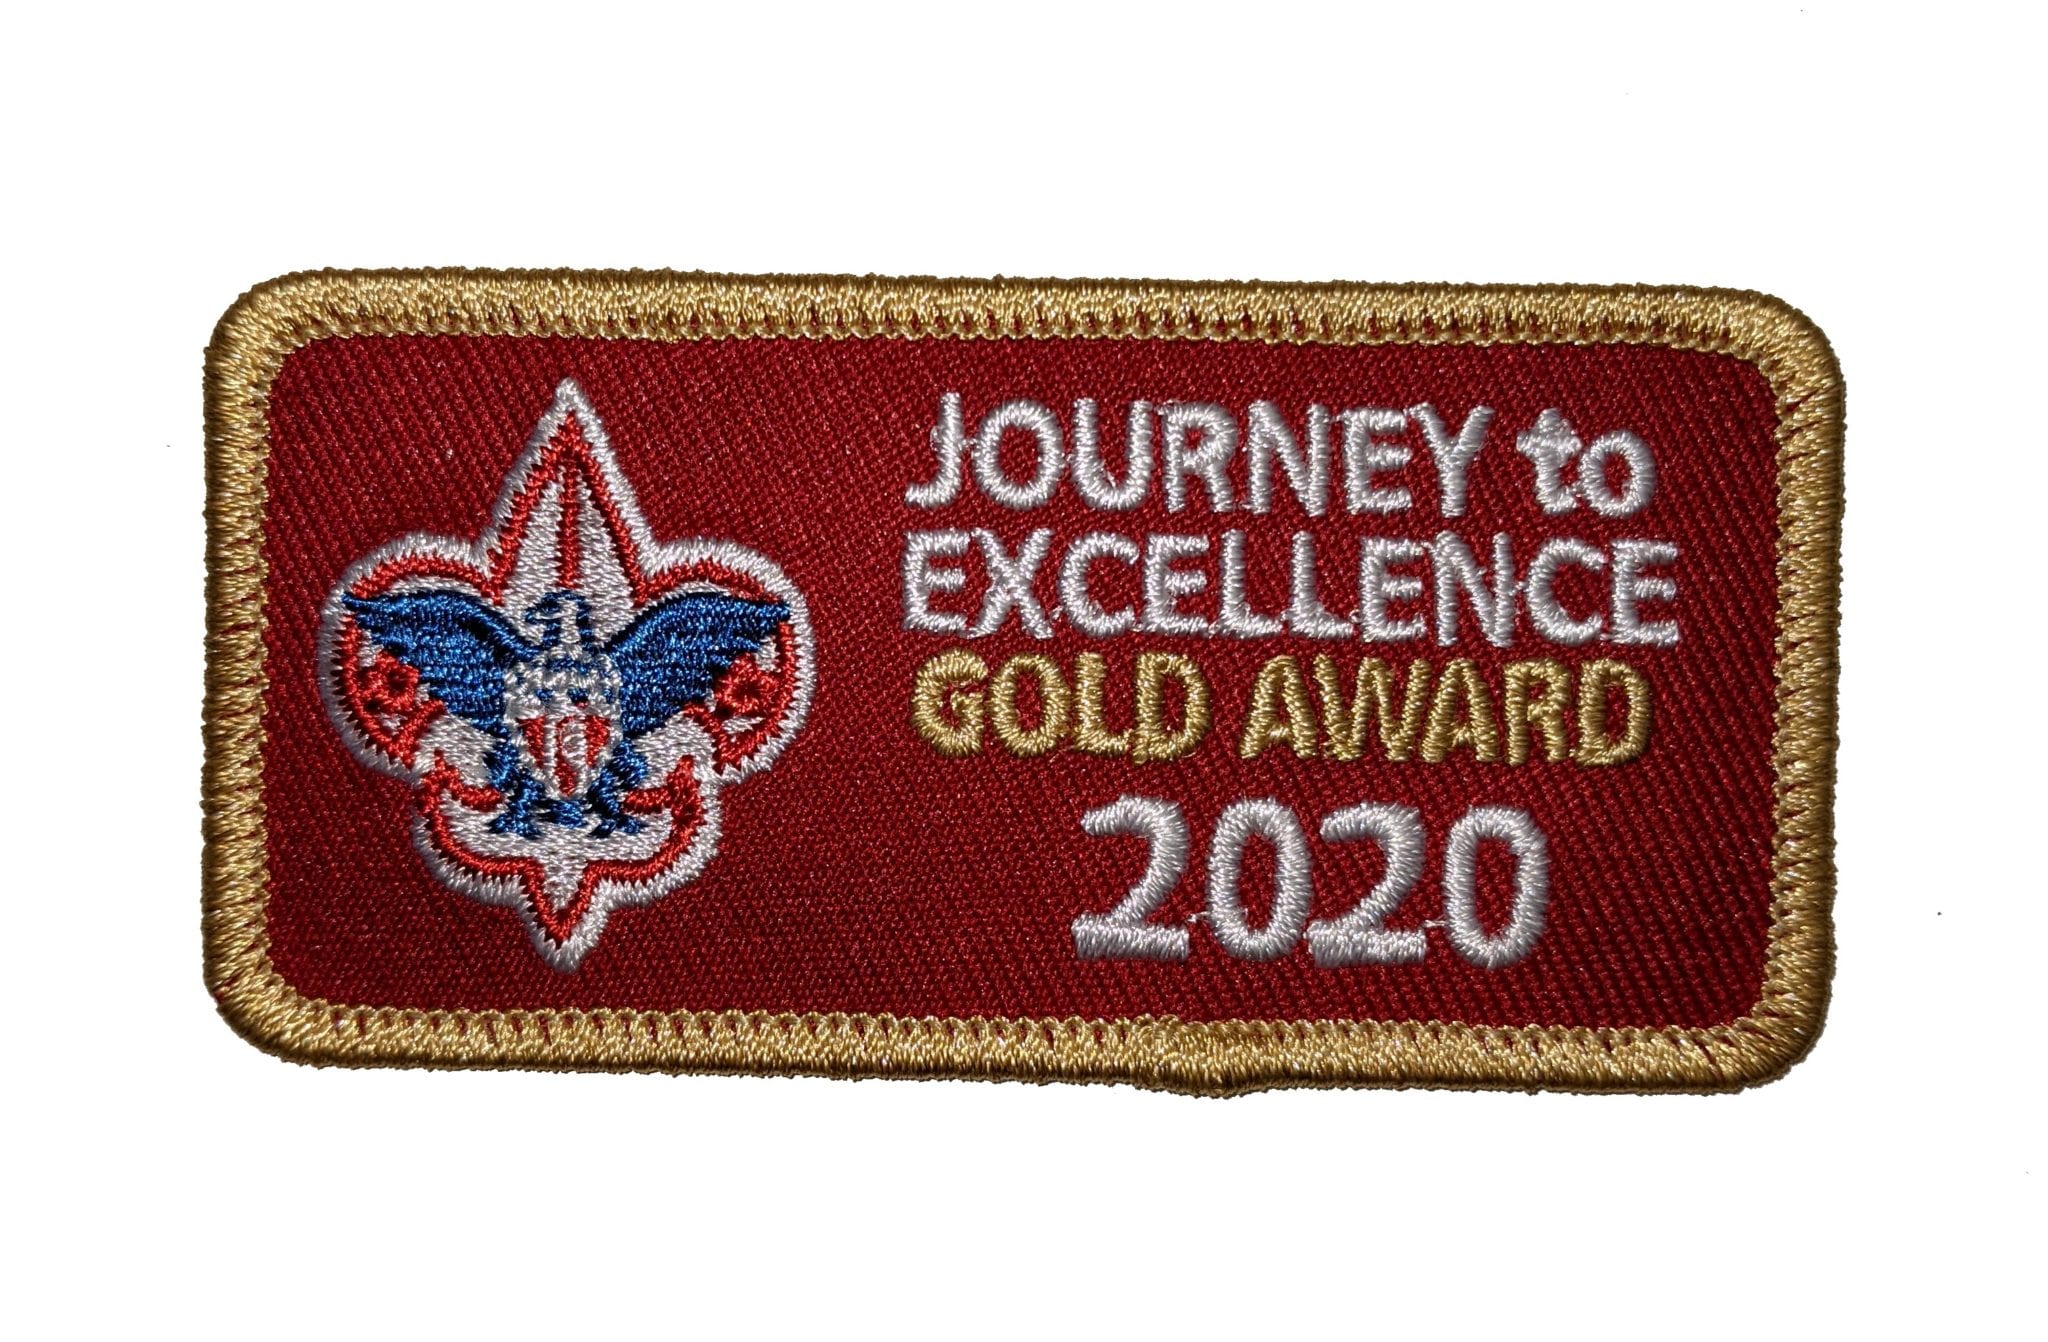 journey to excellence gold award patch placement